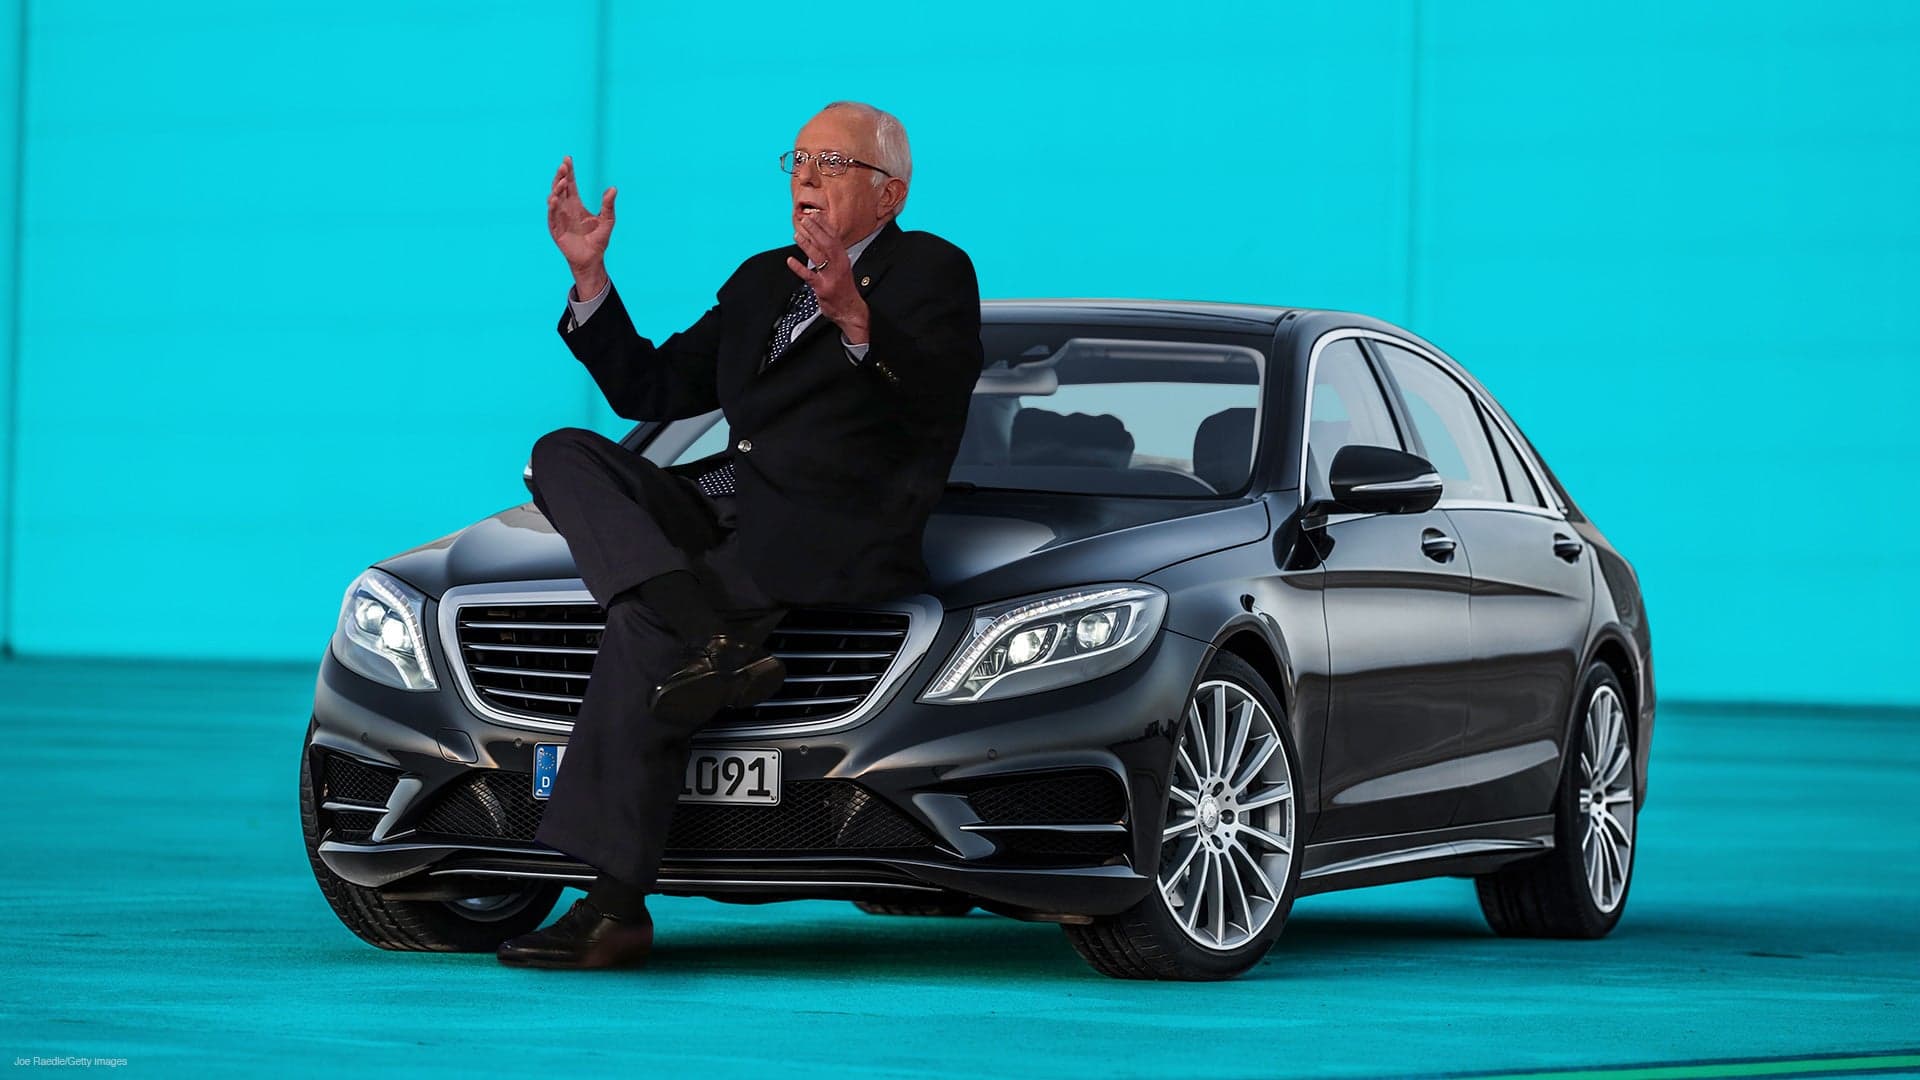 The S-Class? Try the Mercedes-Benz Oligarch-Class